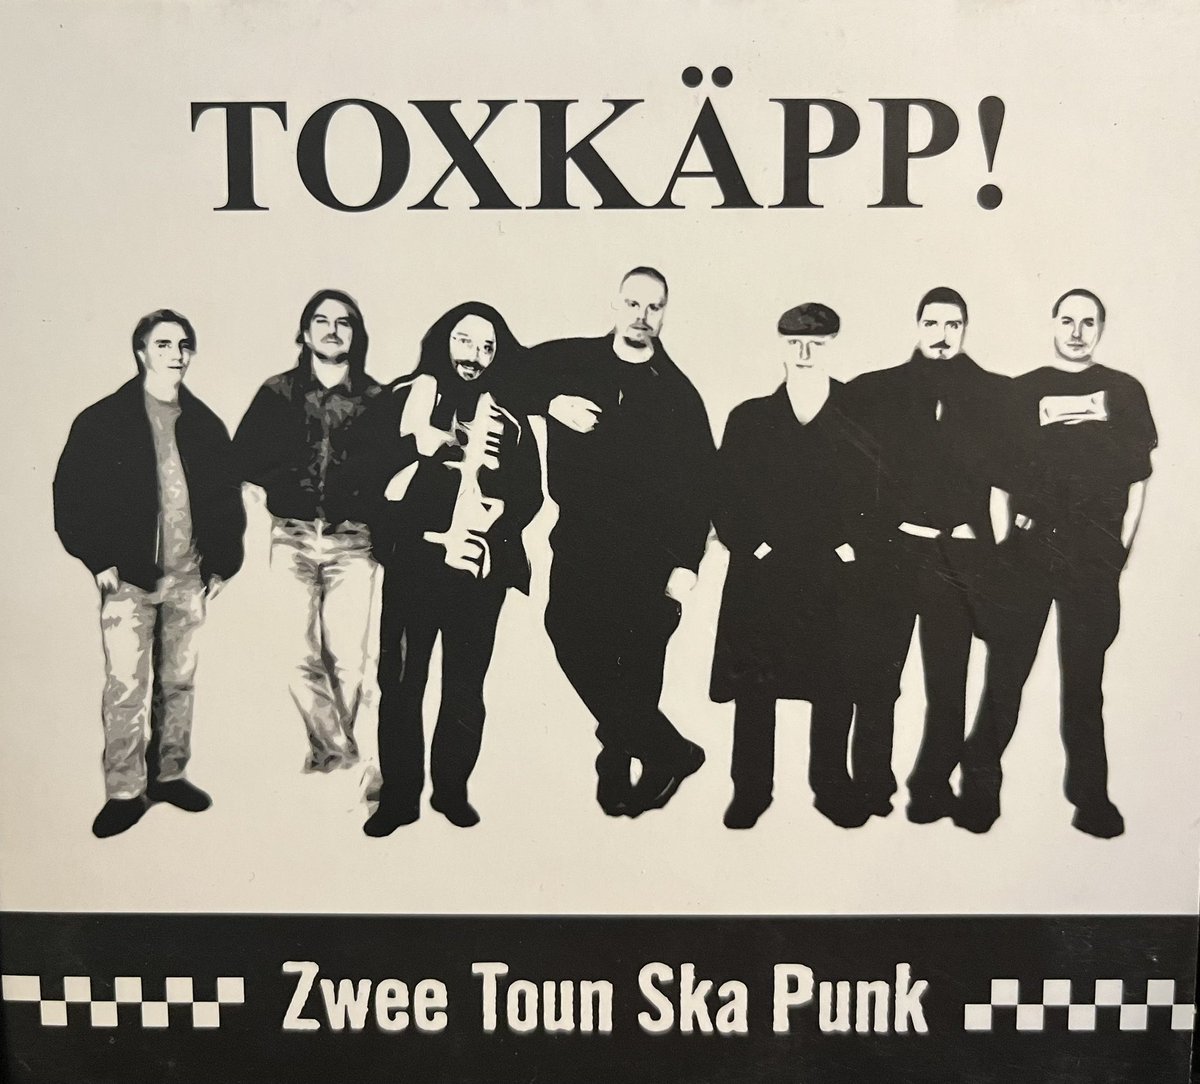 #StillDoinCDs Thanks to a shop called @CDButtek (‘boutique’) in Luxembourg City, I have Lëtzebuergesch treasures like this stellar dub-punk band Toxkäpp (‘Toxichead’ = stubborn), combining wit, sax, punk, horns, ska & Luxembourgish 🇱🇺 lyrics. ‘Zwee Toun (Two Tone) Ska Punk, 2005.